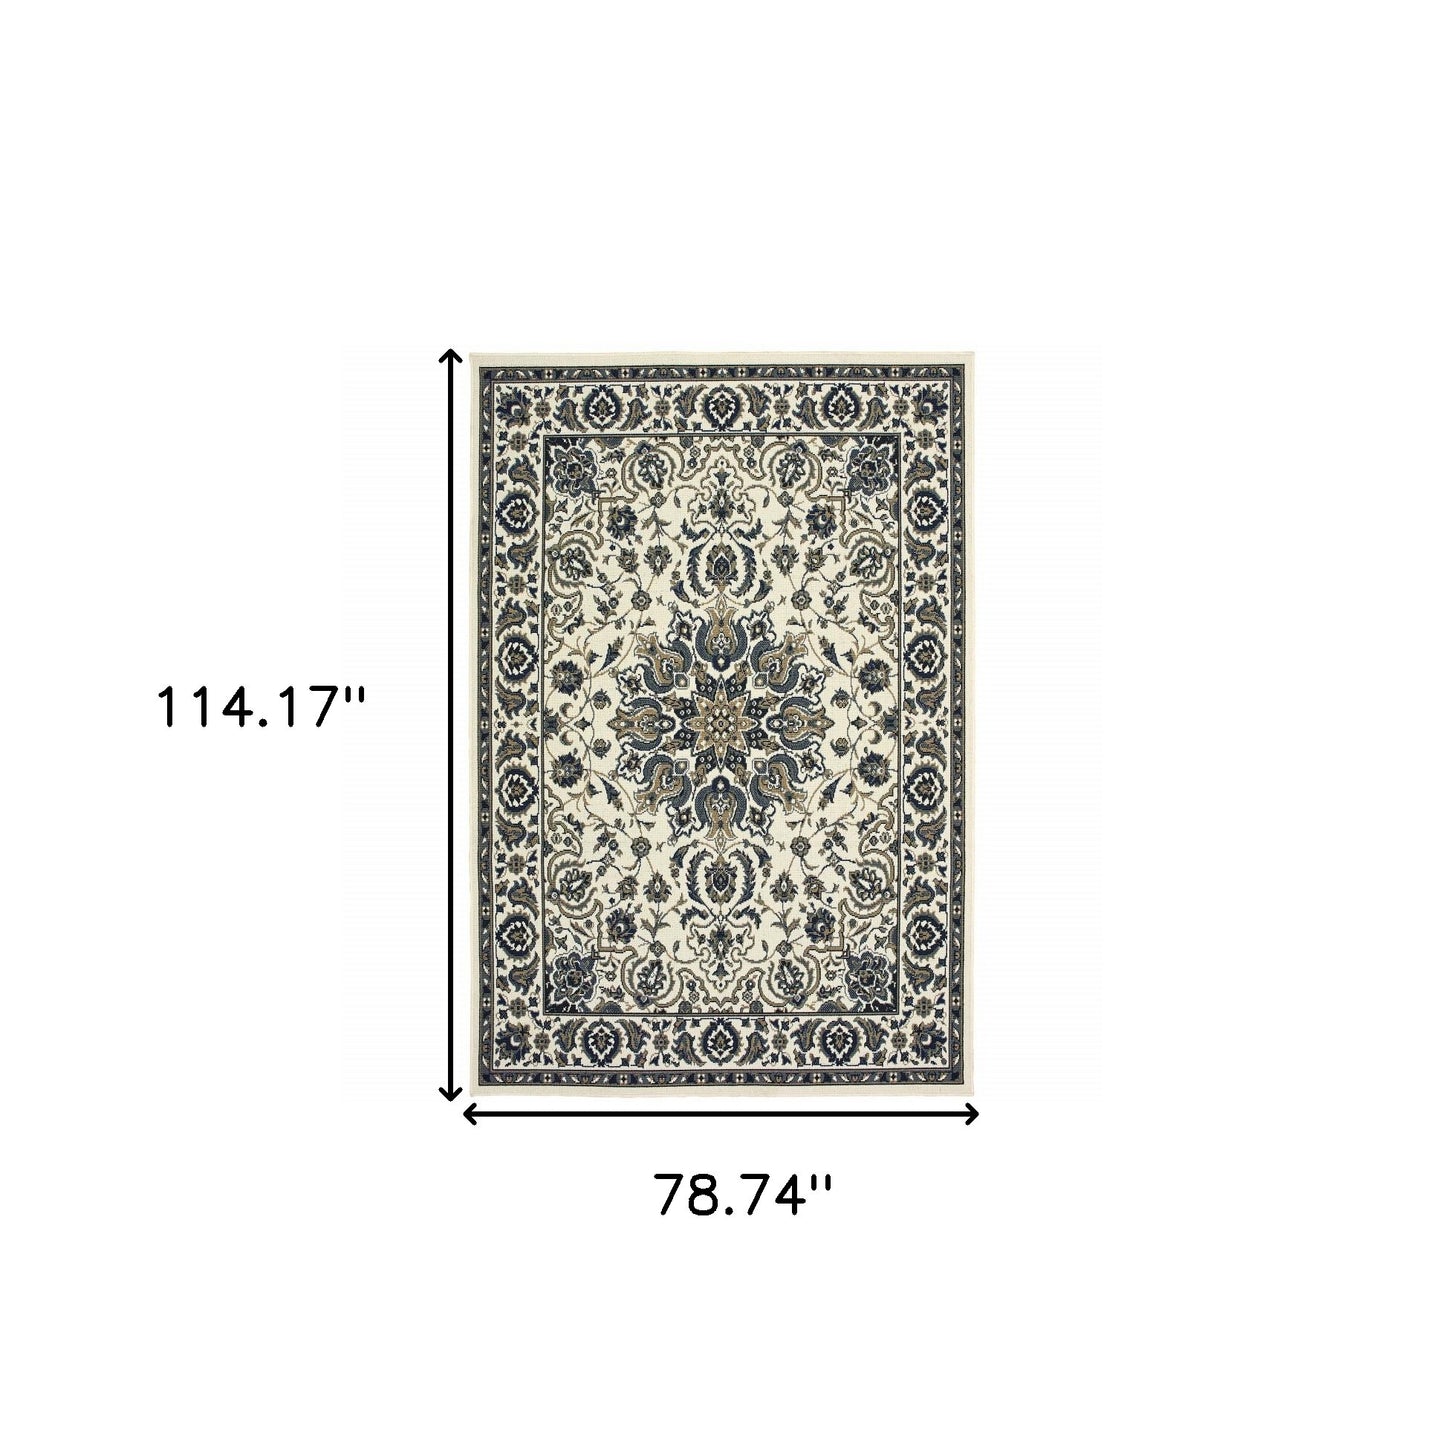 7' x 10' Ivory and Blue Oriental Stain Resistant Indoor Outdoor Area Rug